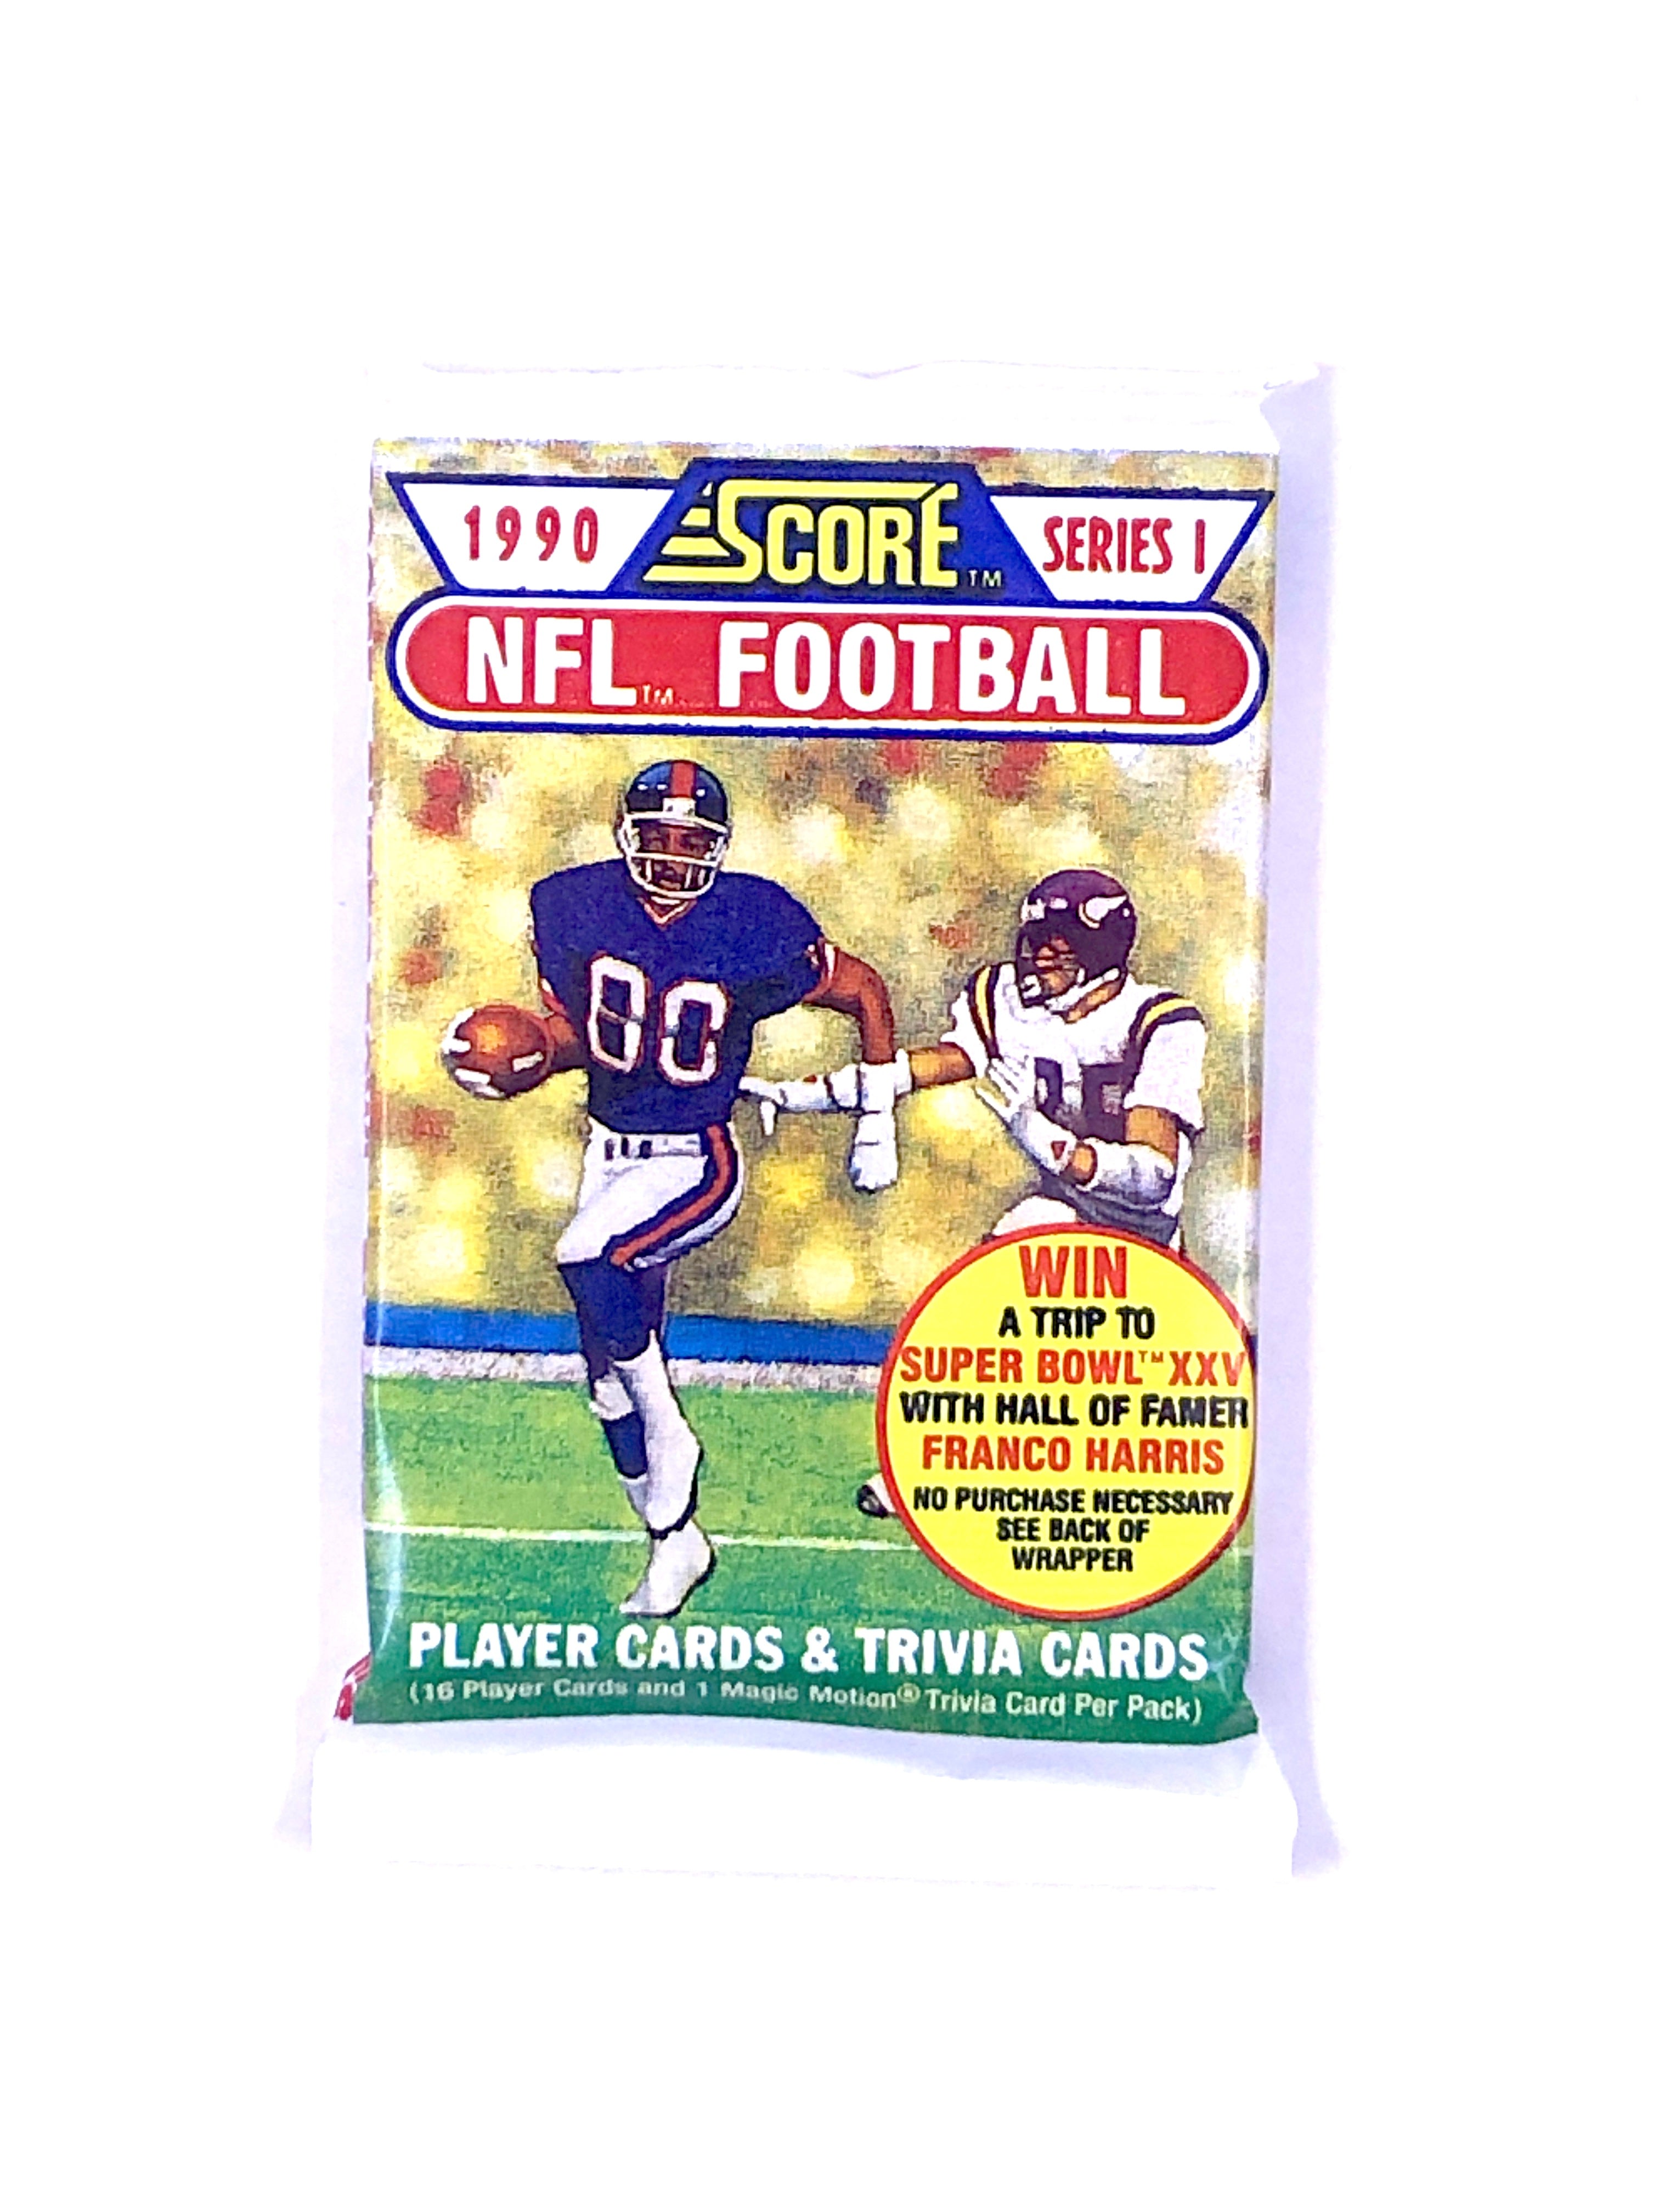 1990 Score NFL Football Series 1 - Sports Cards Norge